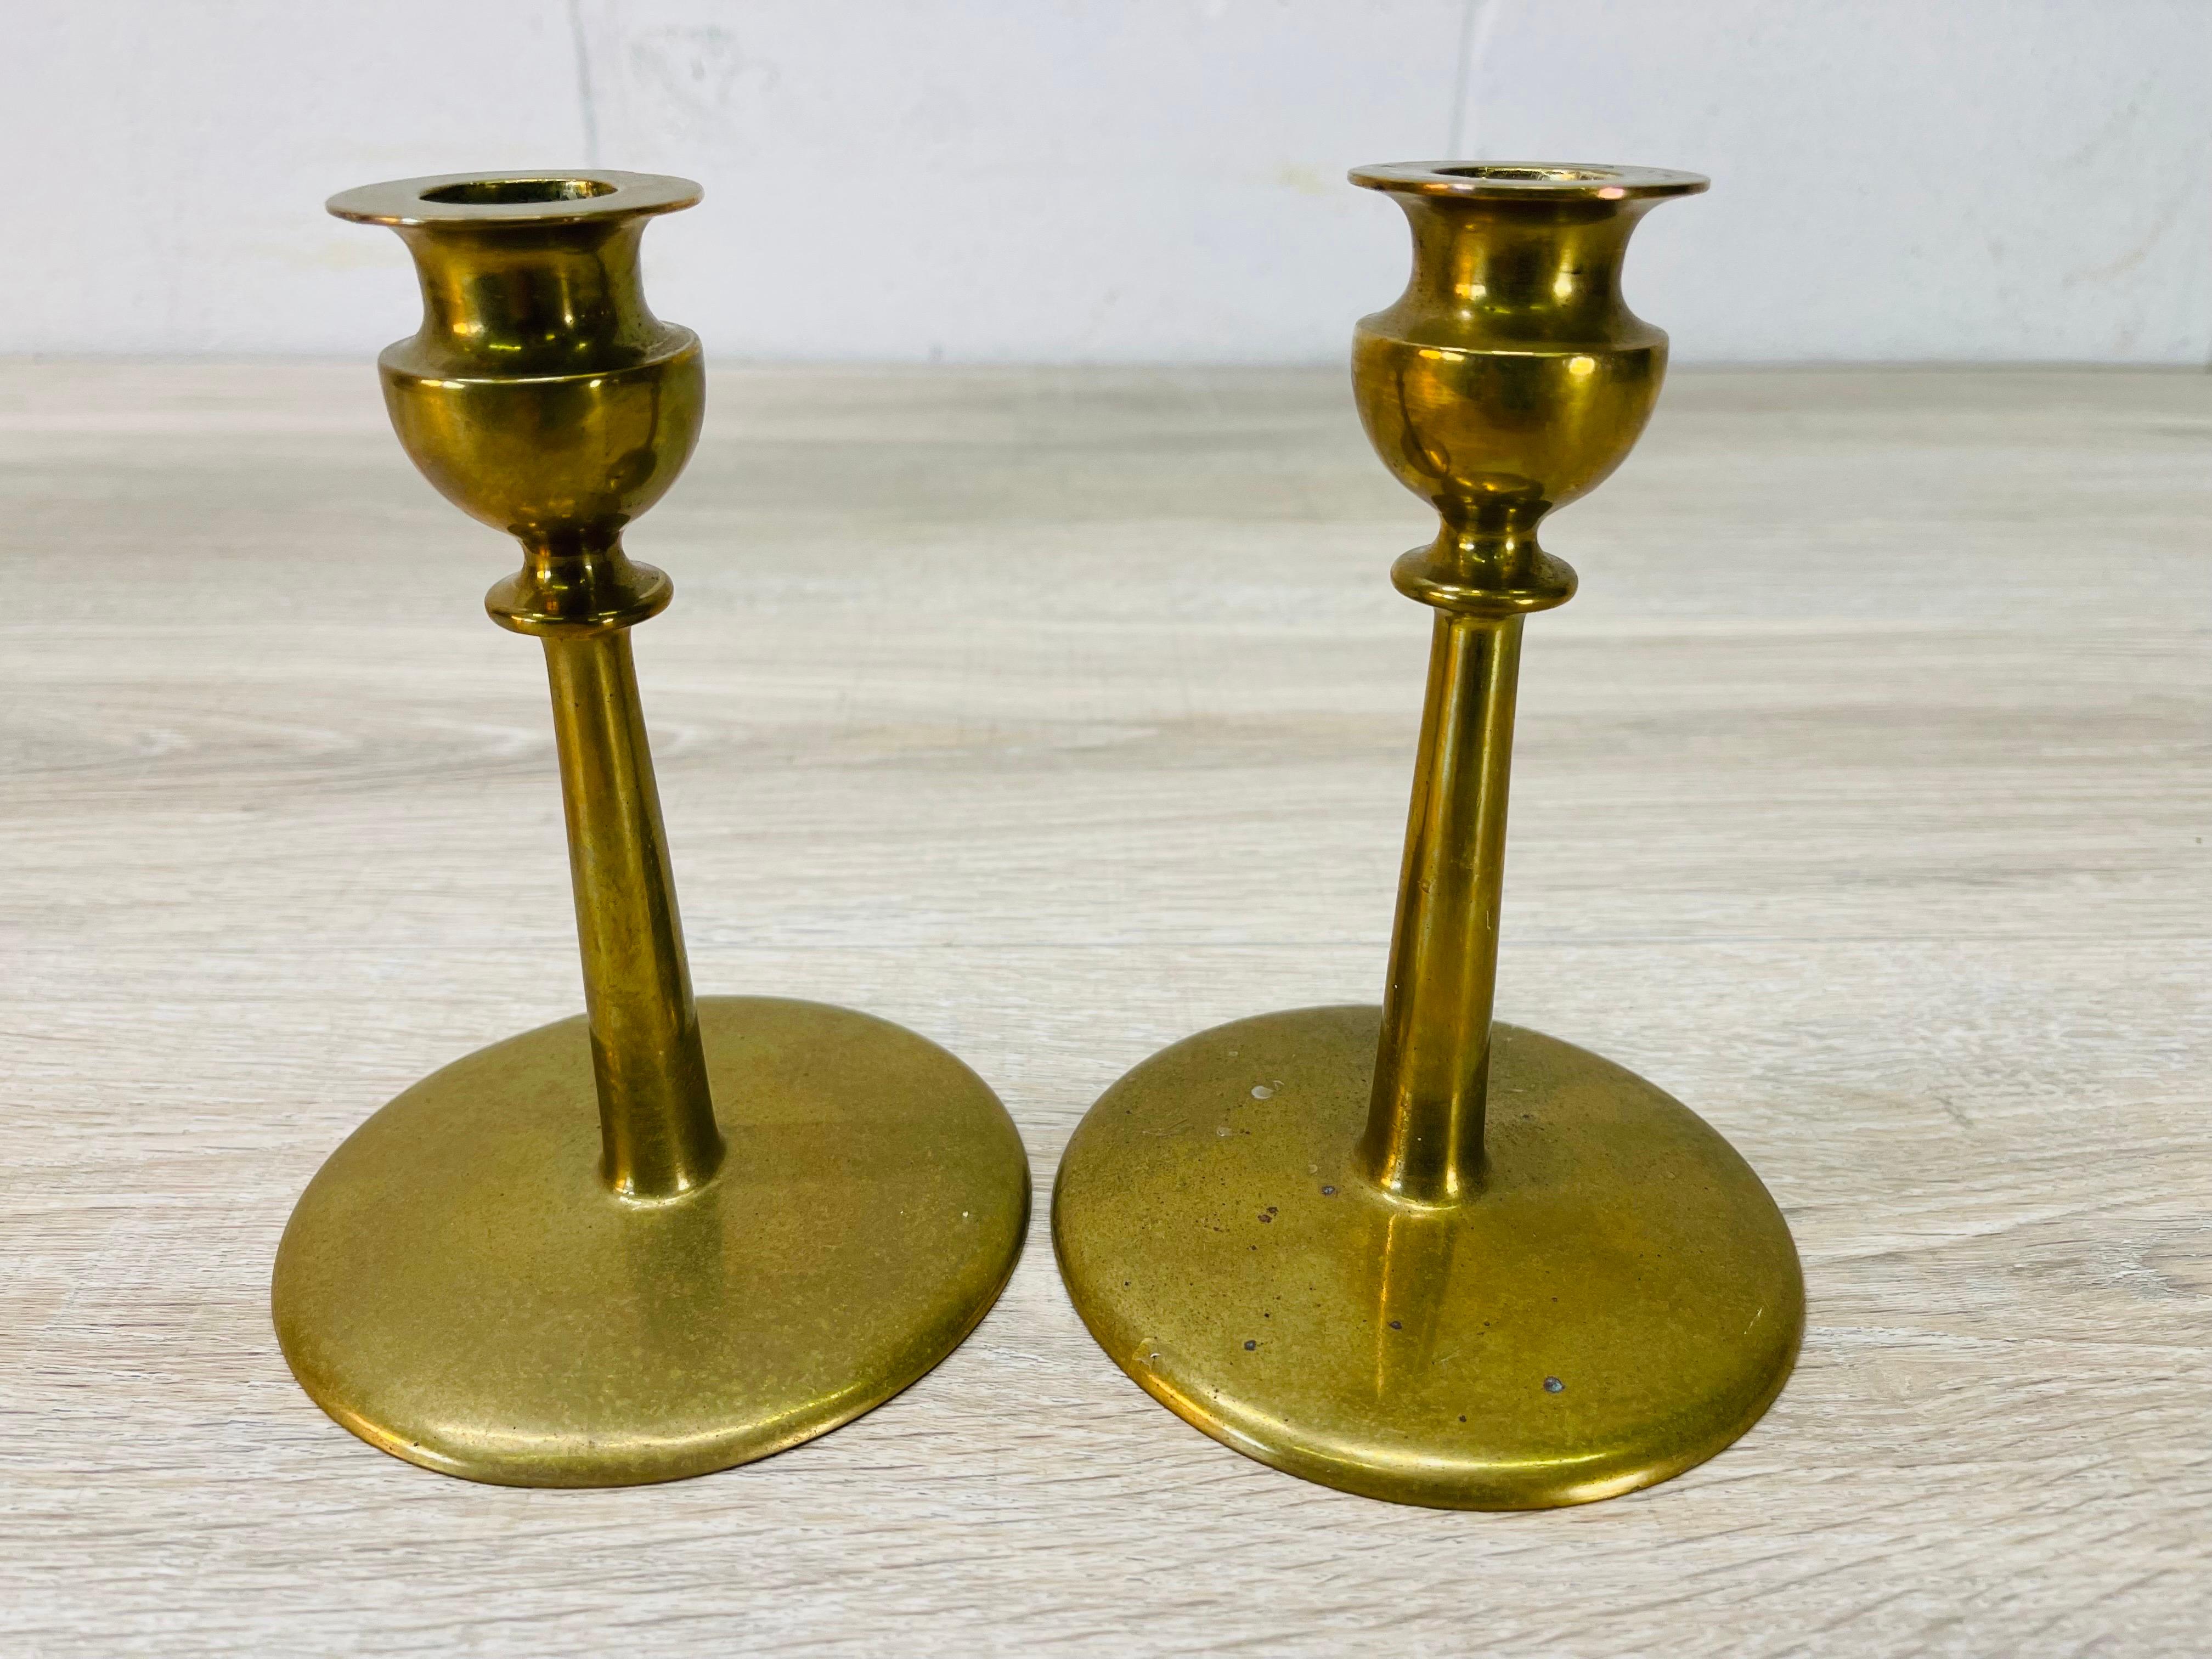 Vintage 1960s pair of solid brass candleholders. The candleholders have a large round base and hold normal sized candles. No marks.